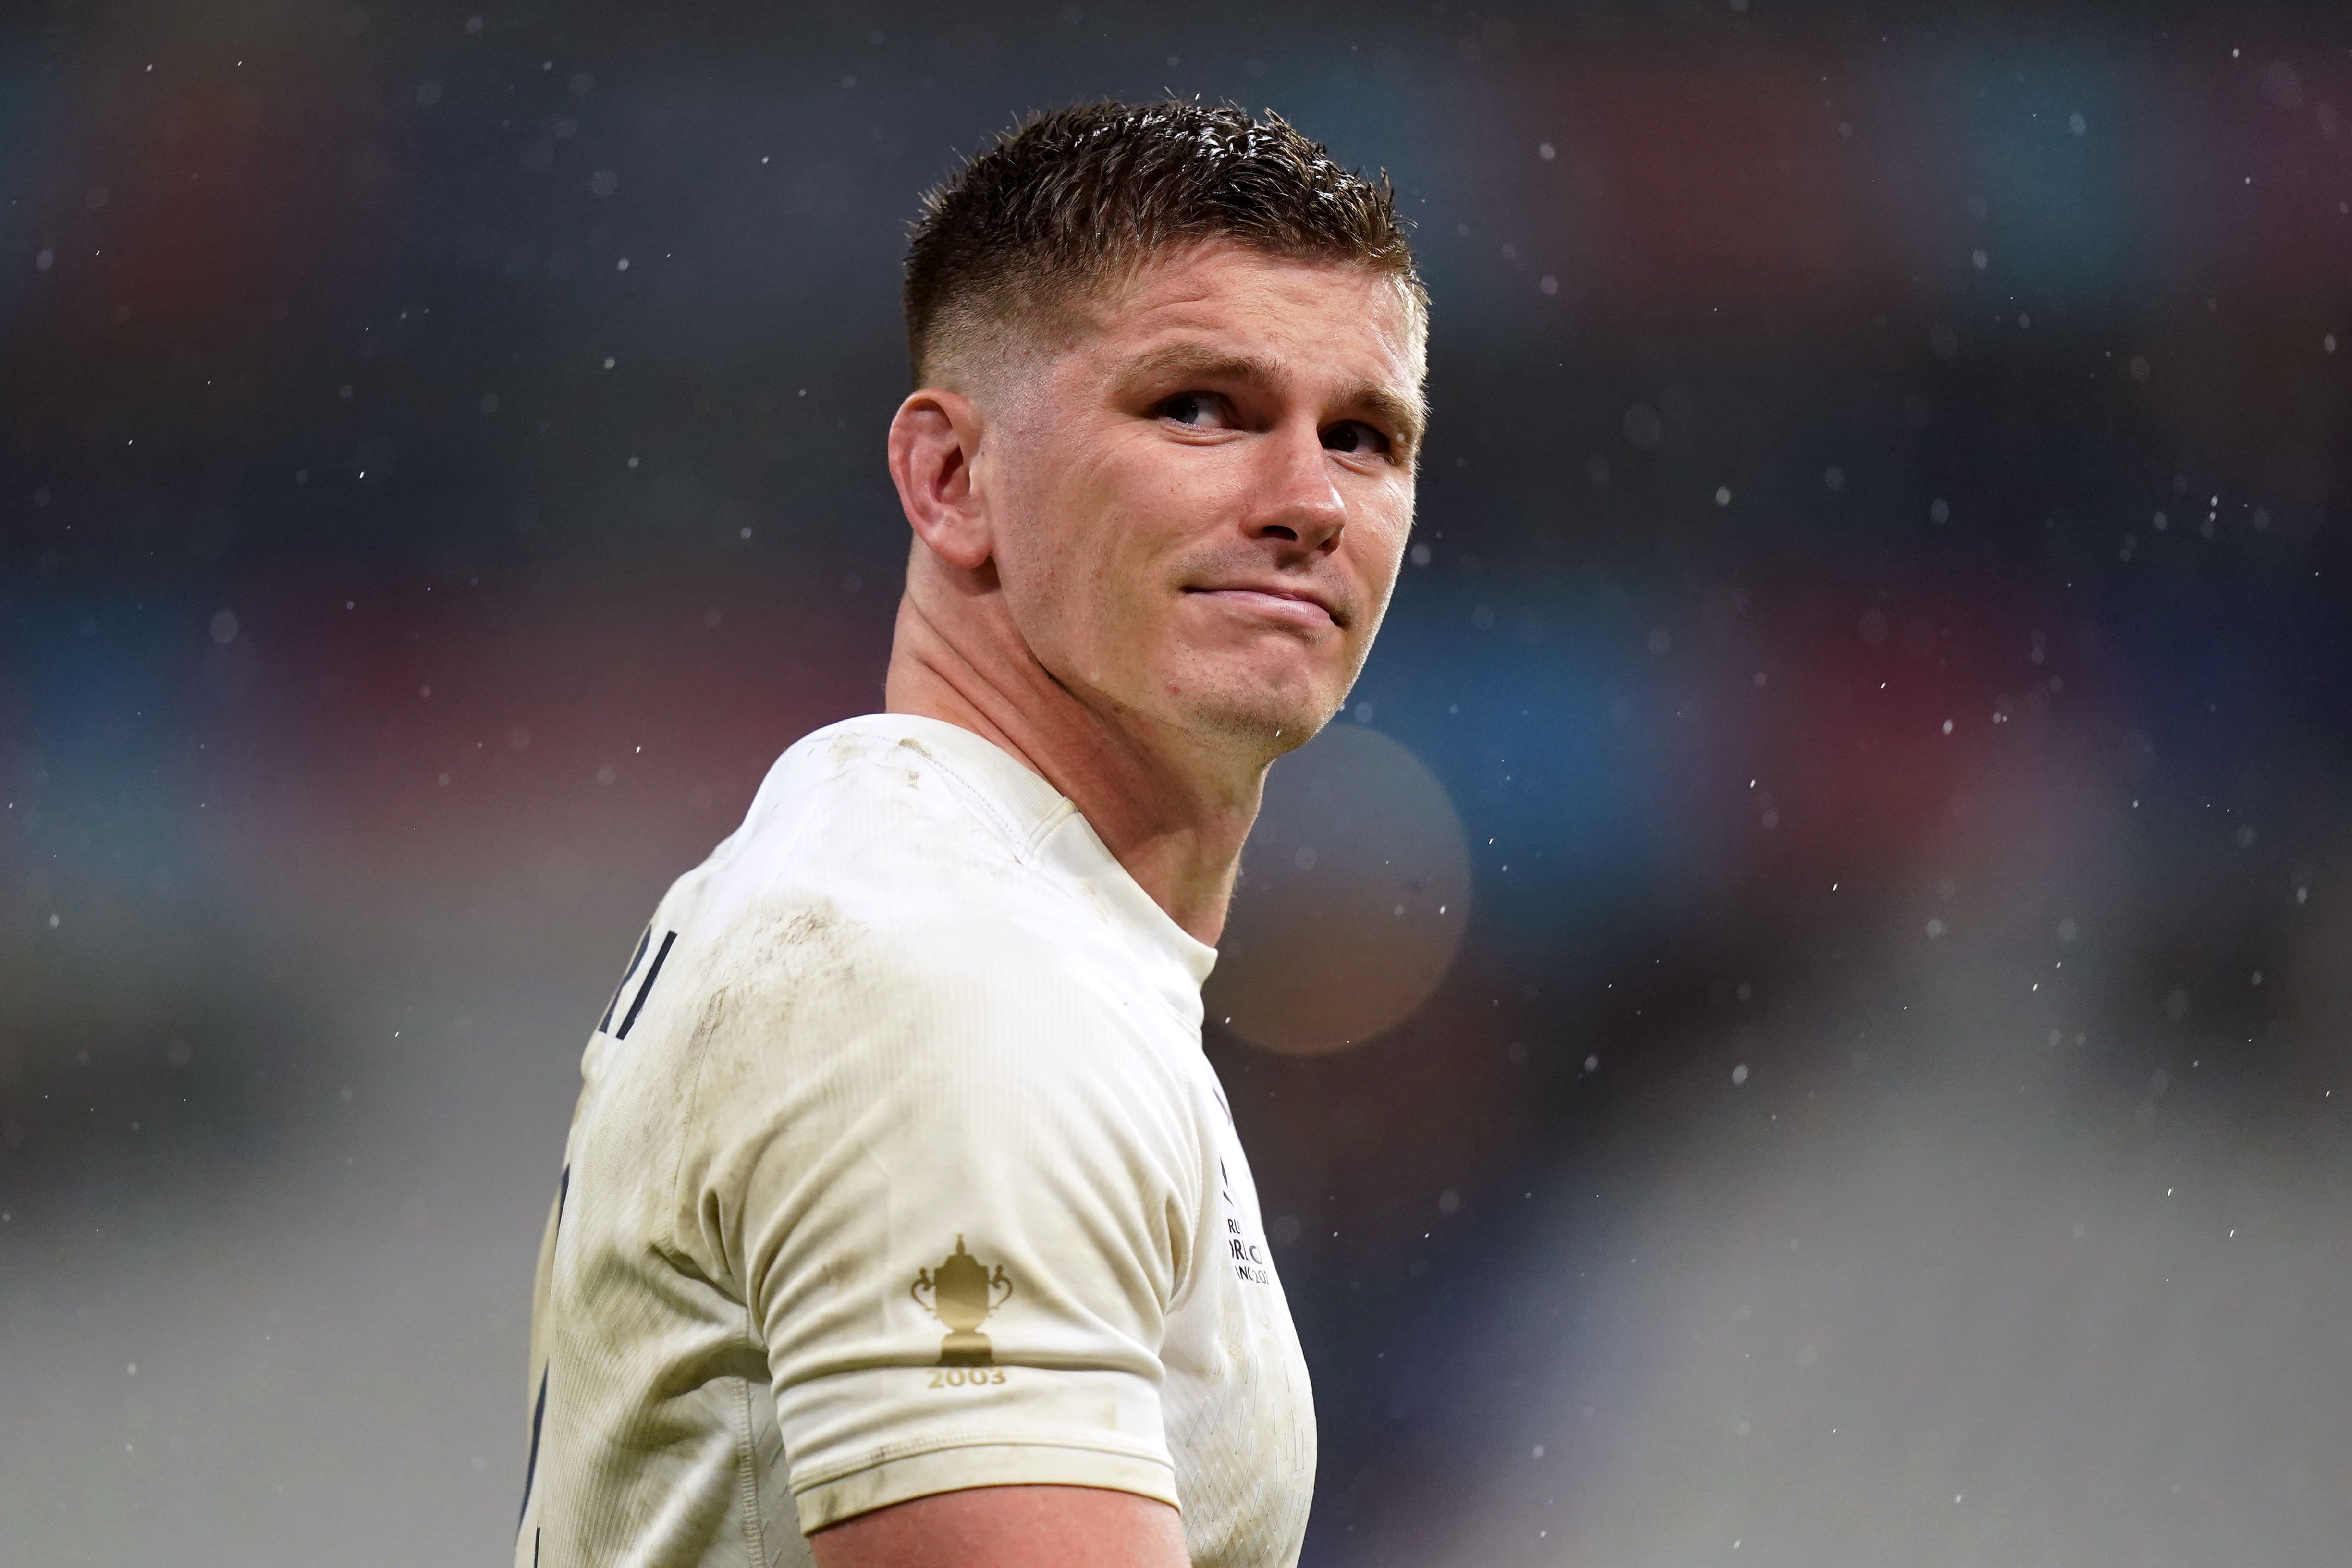 Owen Farrell has taken a break from Test rugby and could join Racing 92